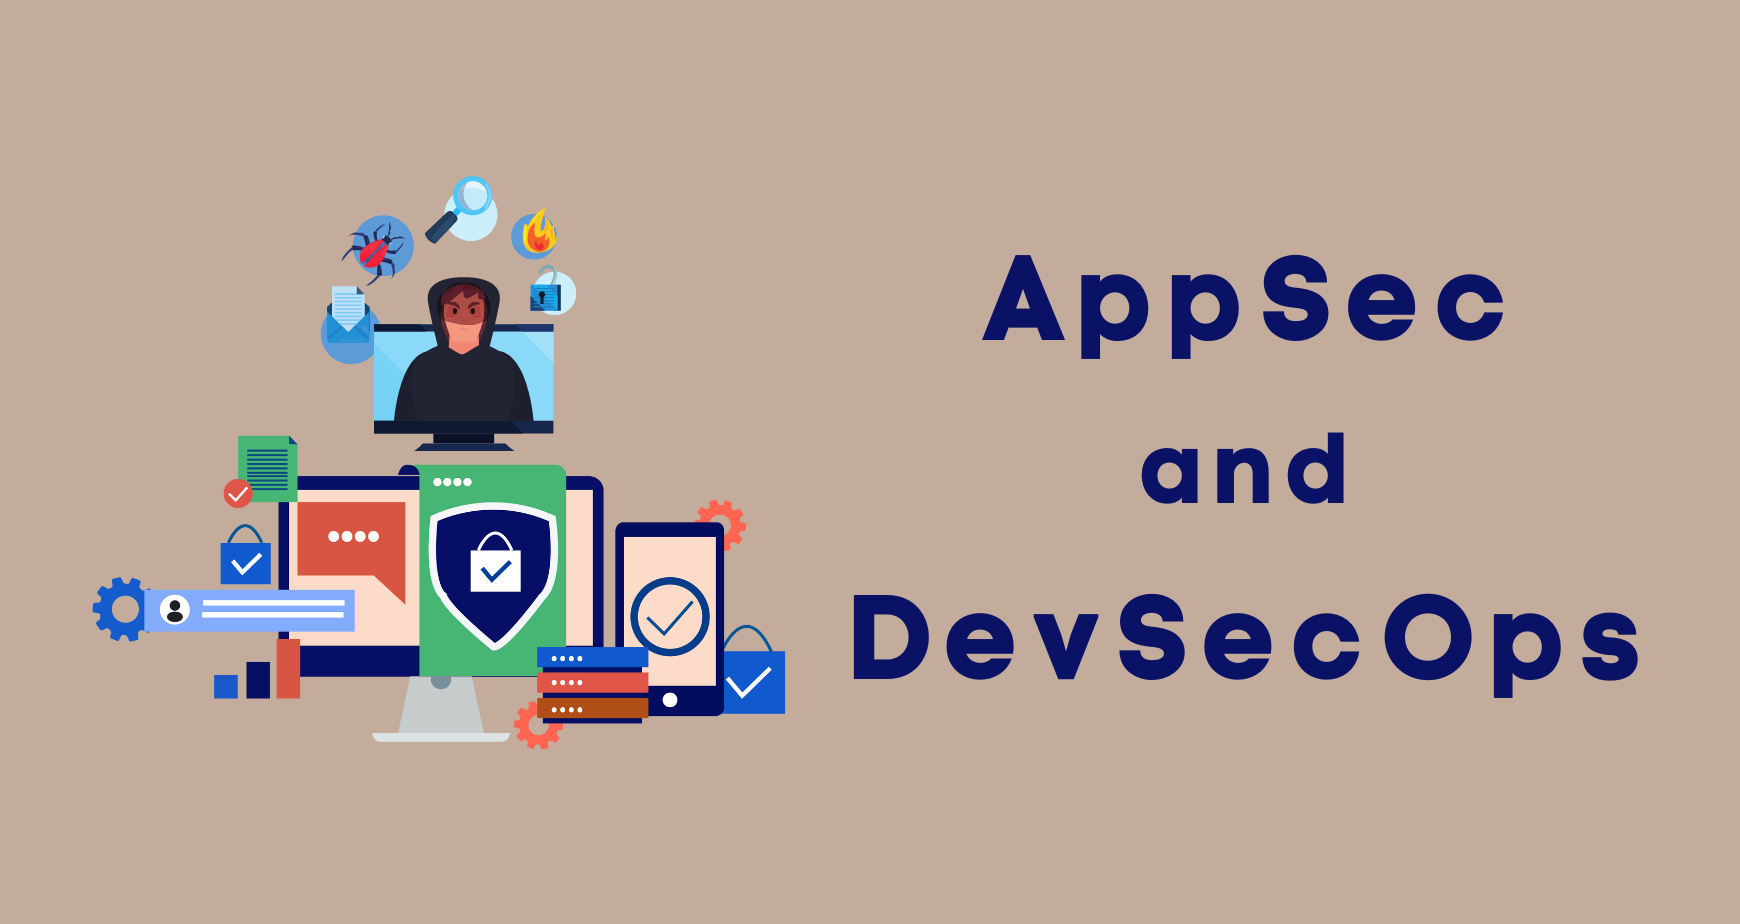 AppSec and DevSecOps